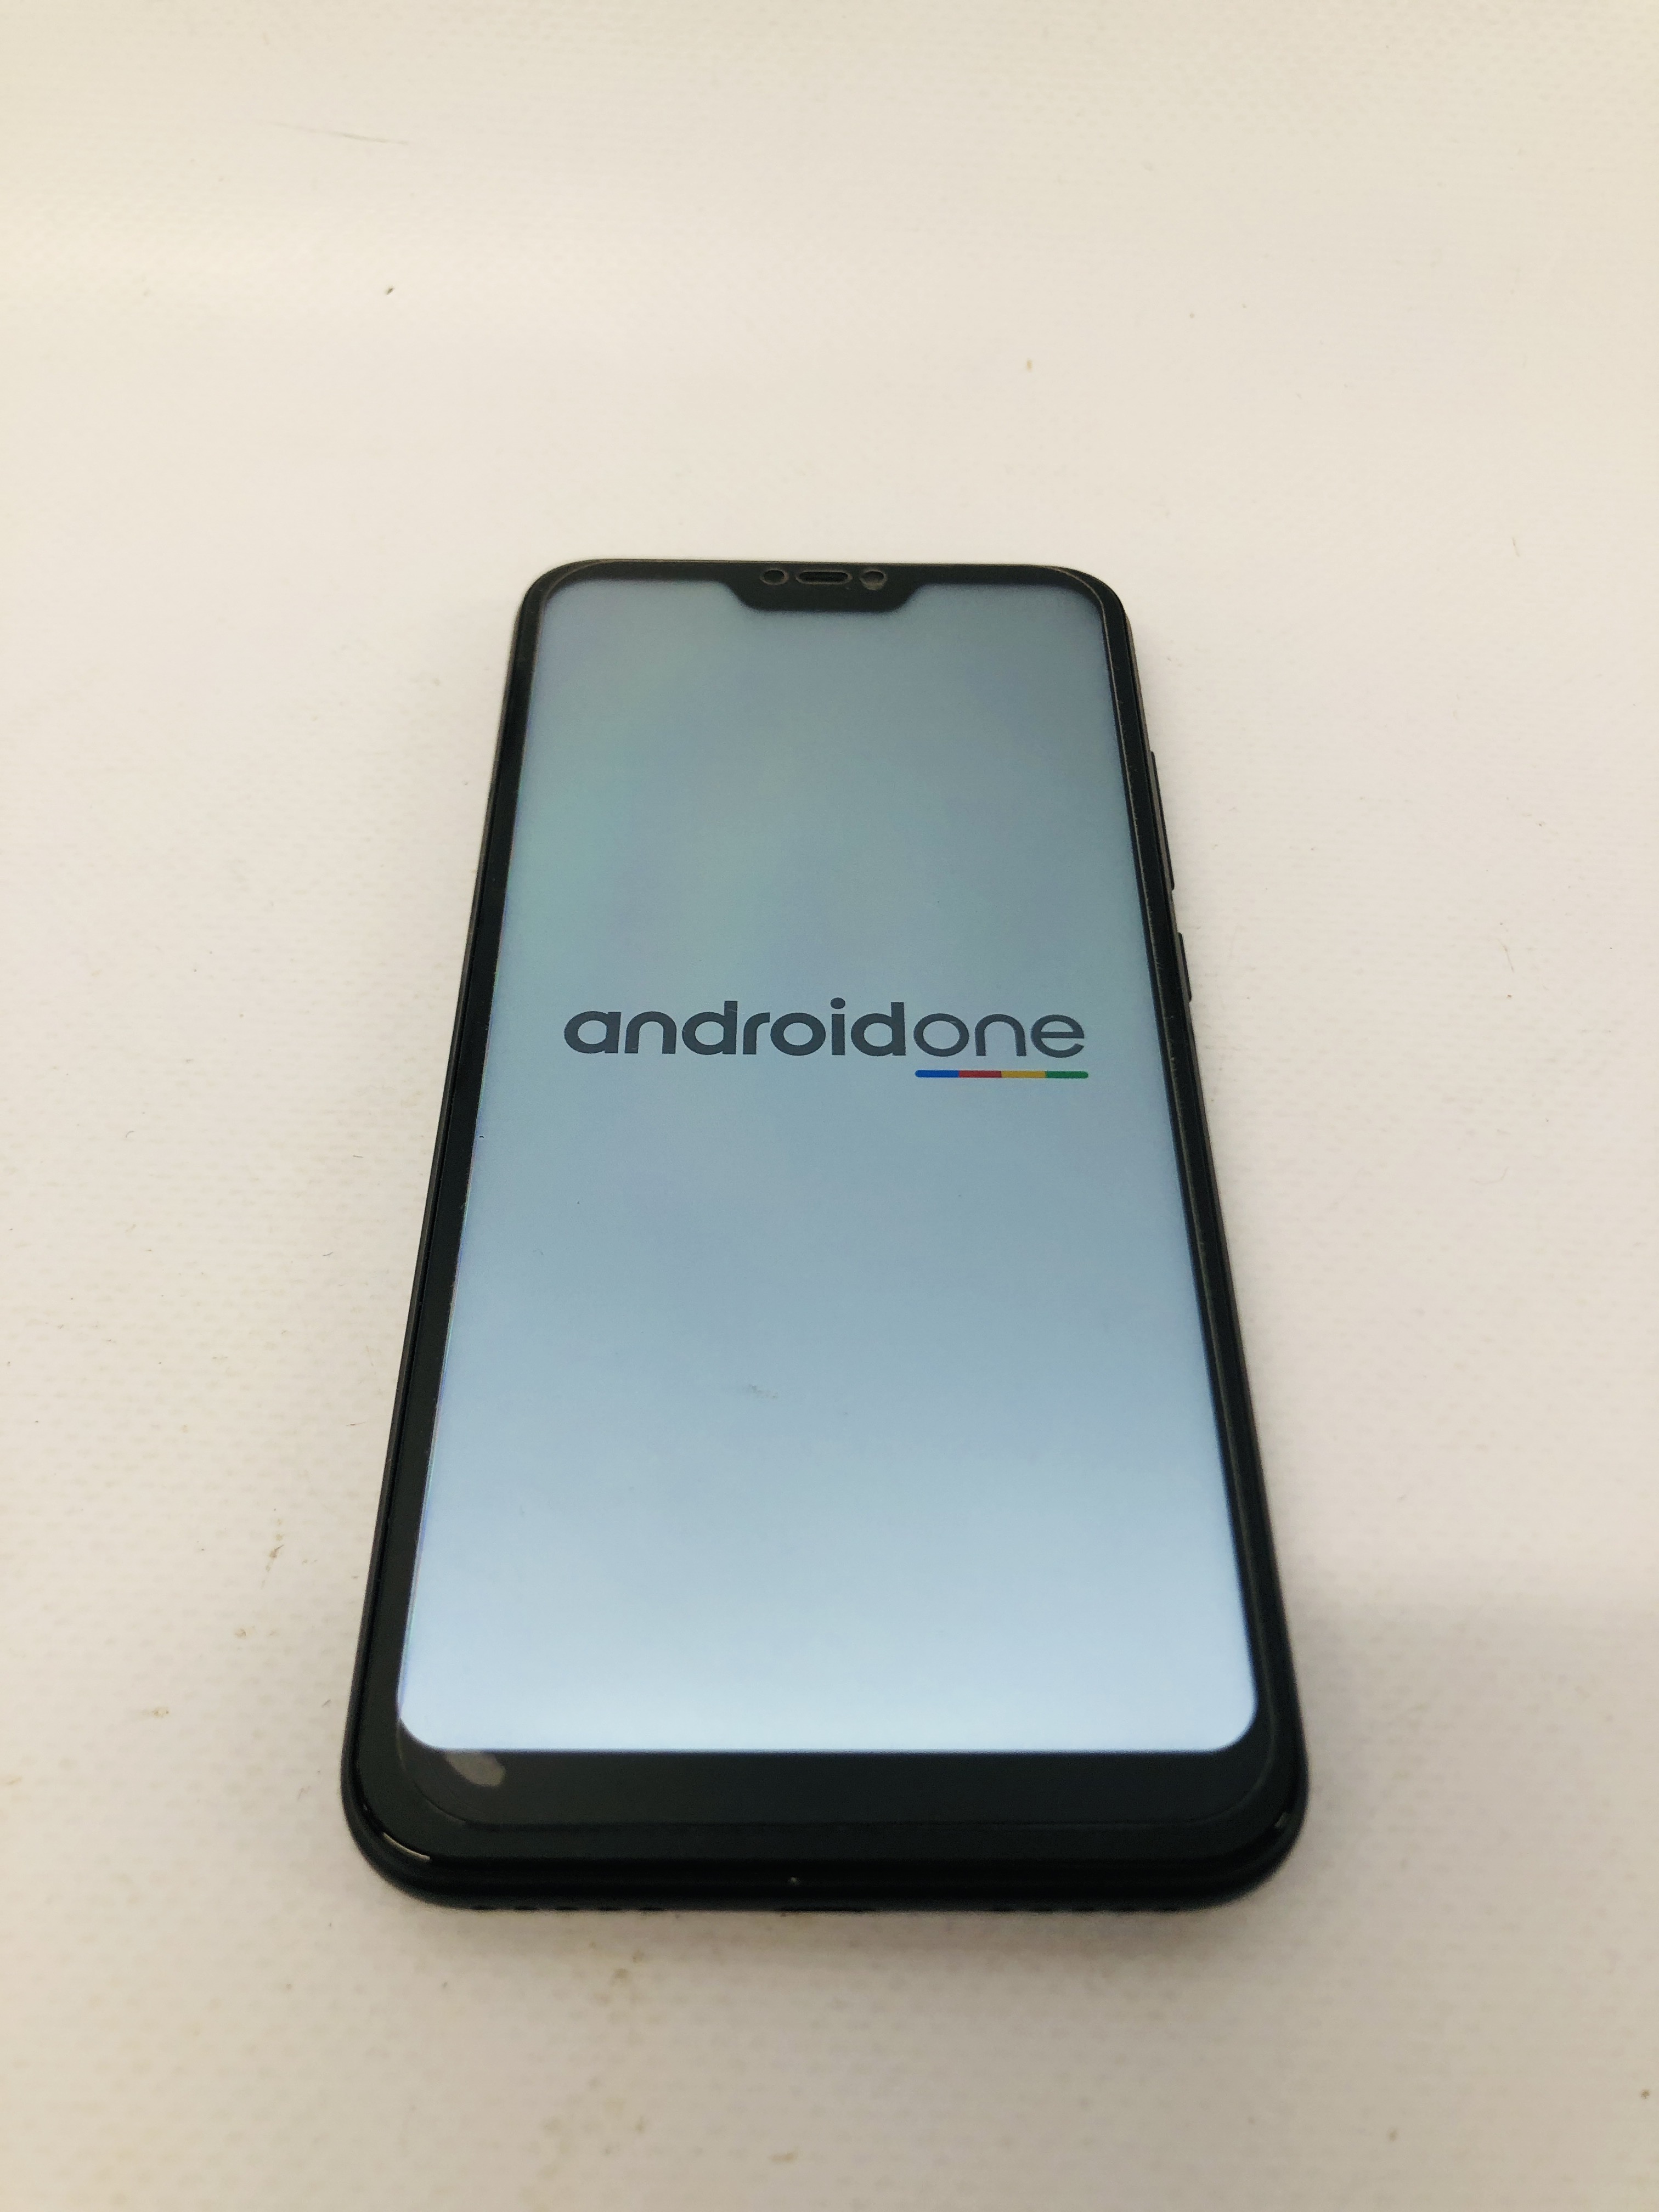 A NI SMARTPHONE MODEL M1805DISG - SOLD AS SEEN - NO GUARANTEE OF CONNECTIVITY